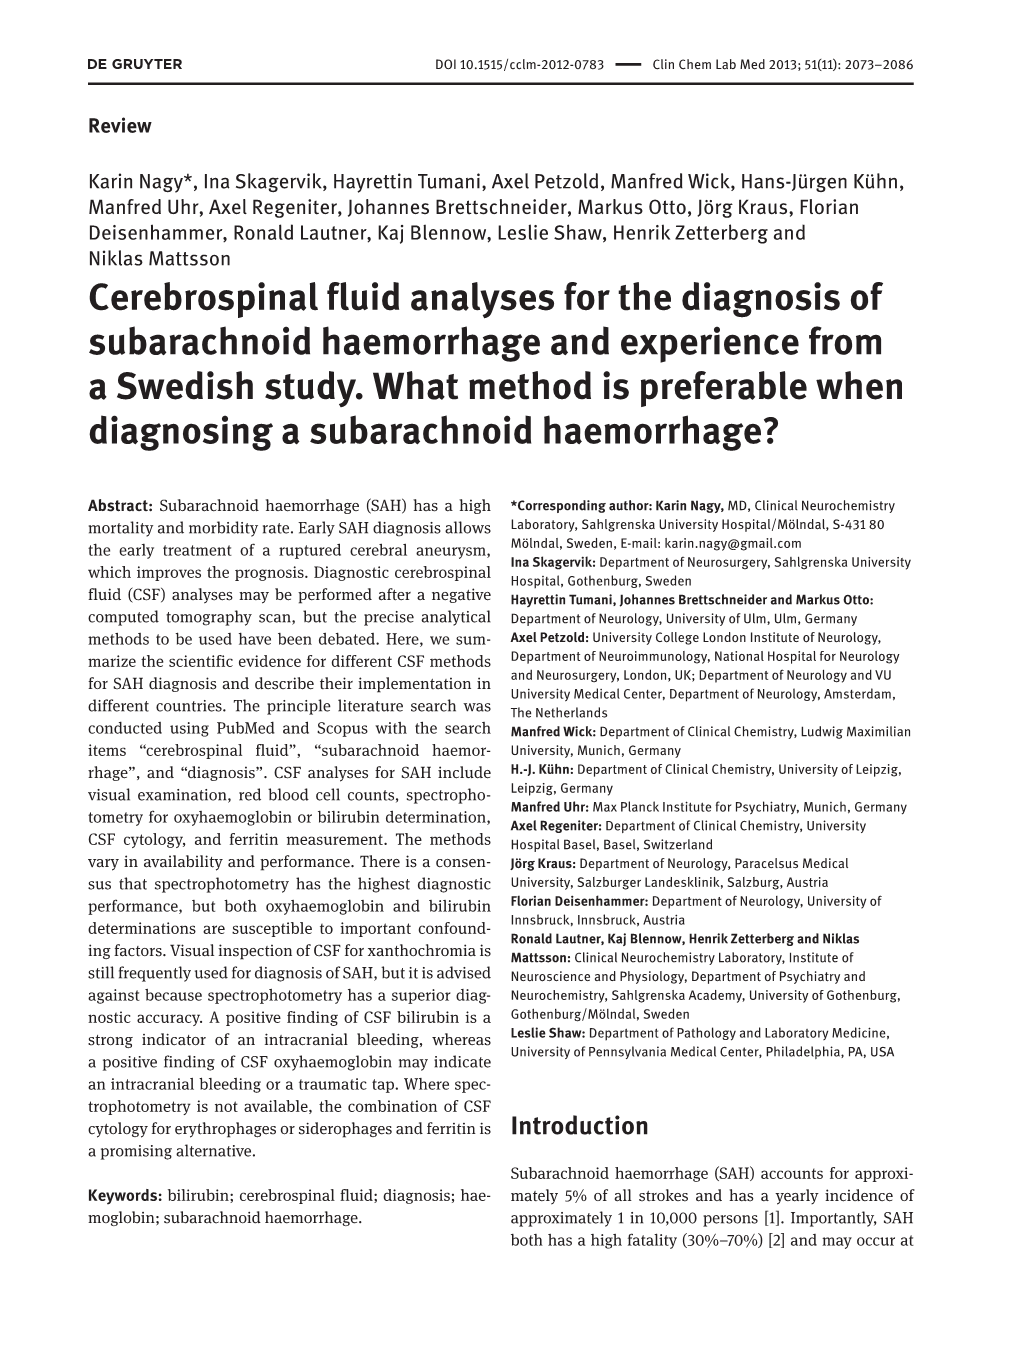 Cerebrospinal Fluid Analyses for the Diagnosis of Subarachnoid Haemorrhage and Experience from a Swedish Study. What Method Is P